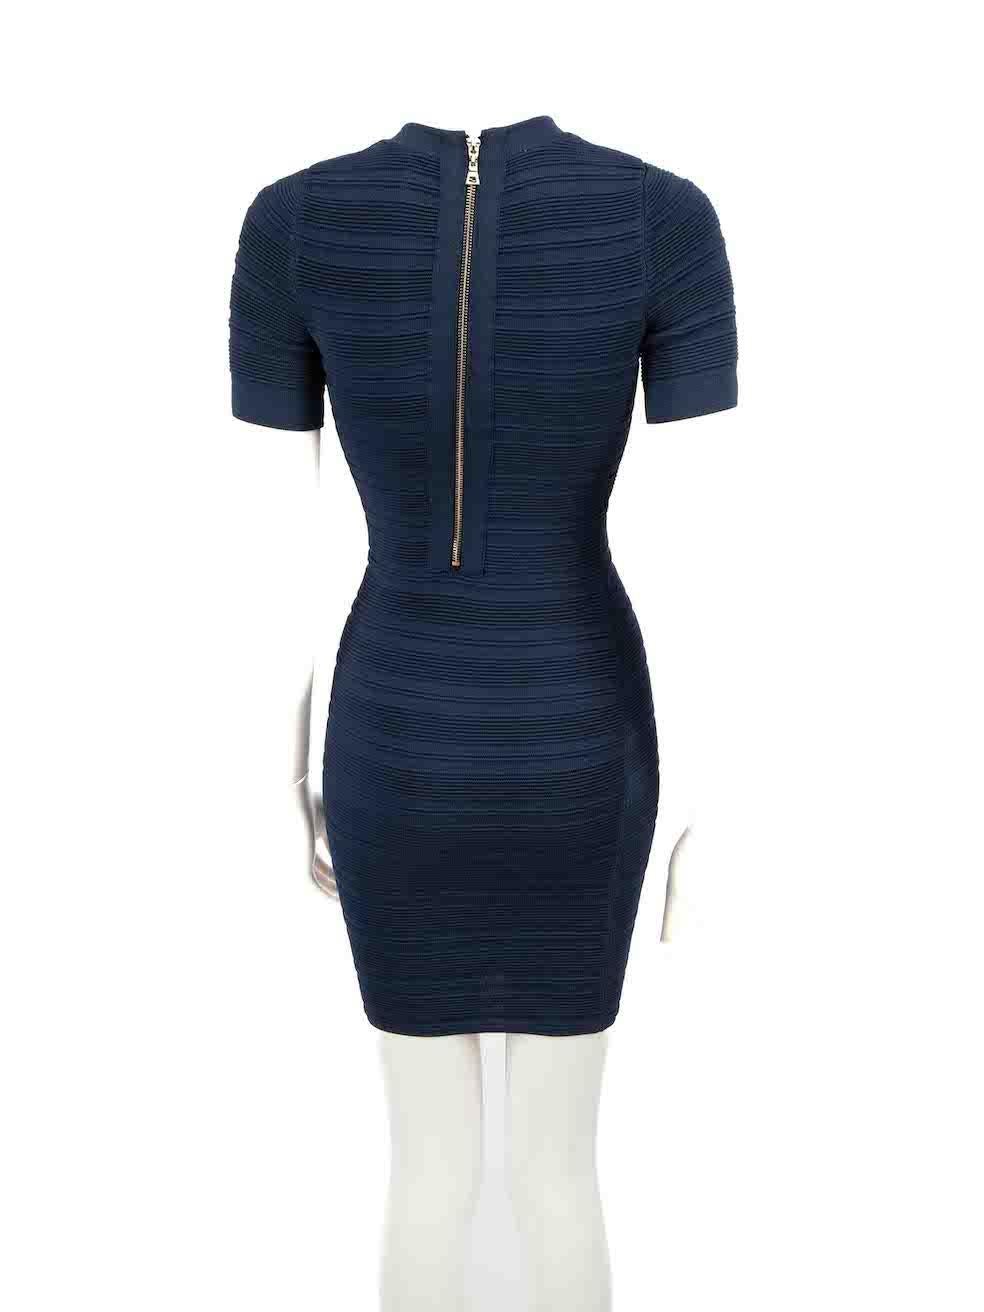 Ronny Kobo Navy Striped Knee Length Dress Size XS In New Condition For Sale In London, GB